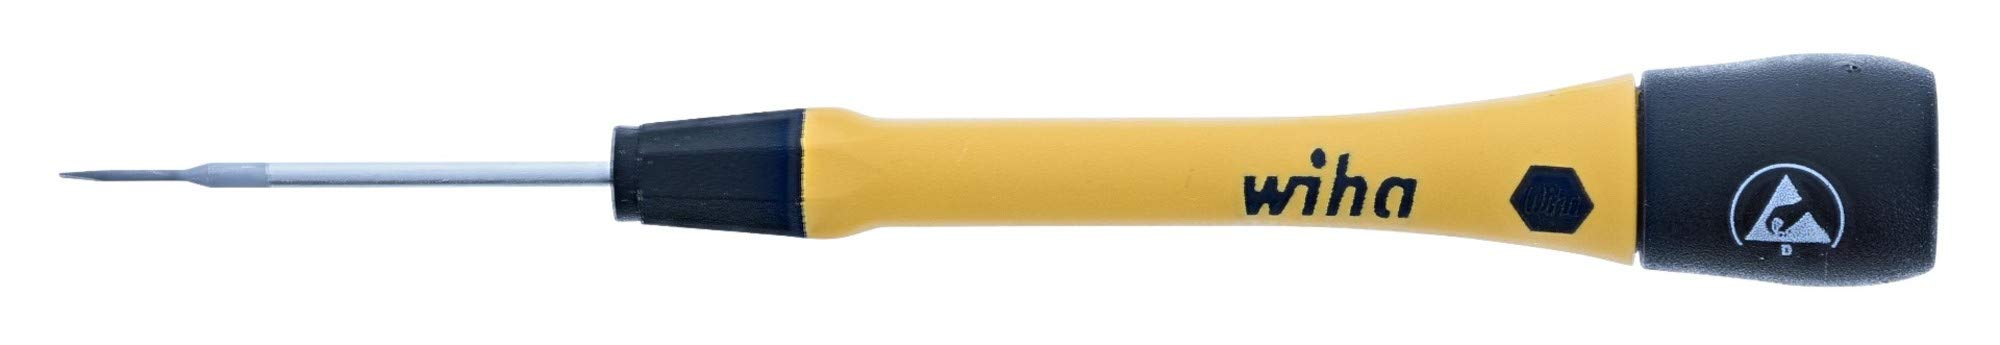 Precision Screwdriver - Slotted .8mm x 40mm